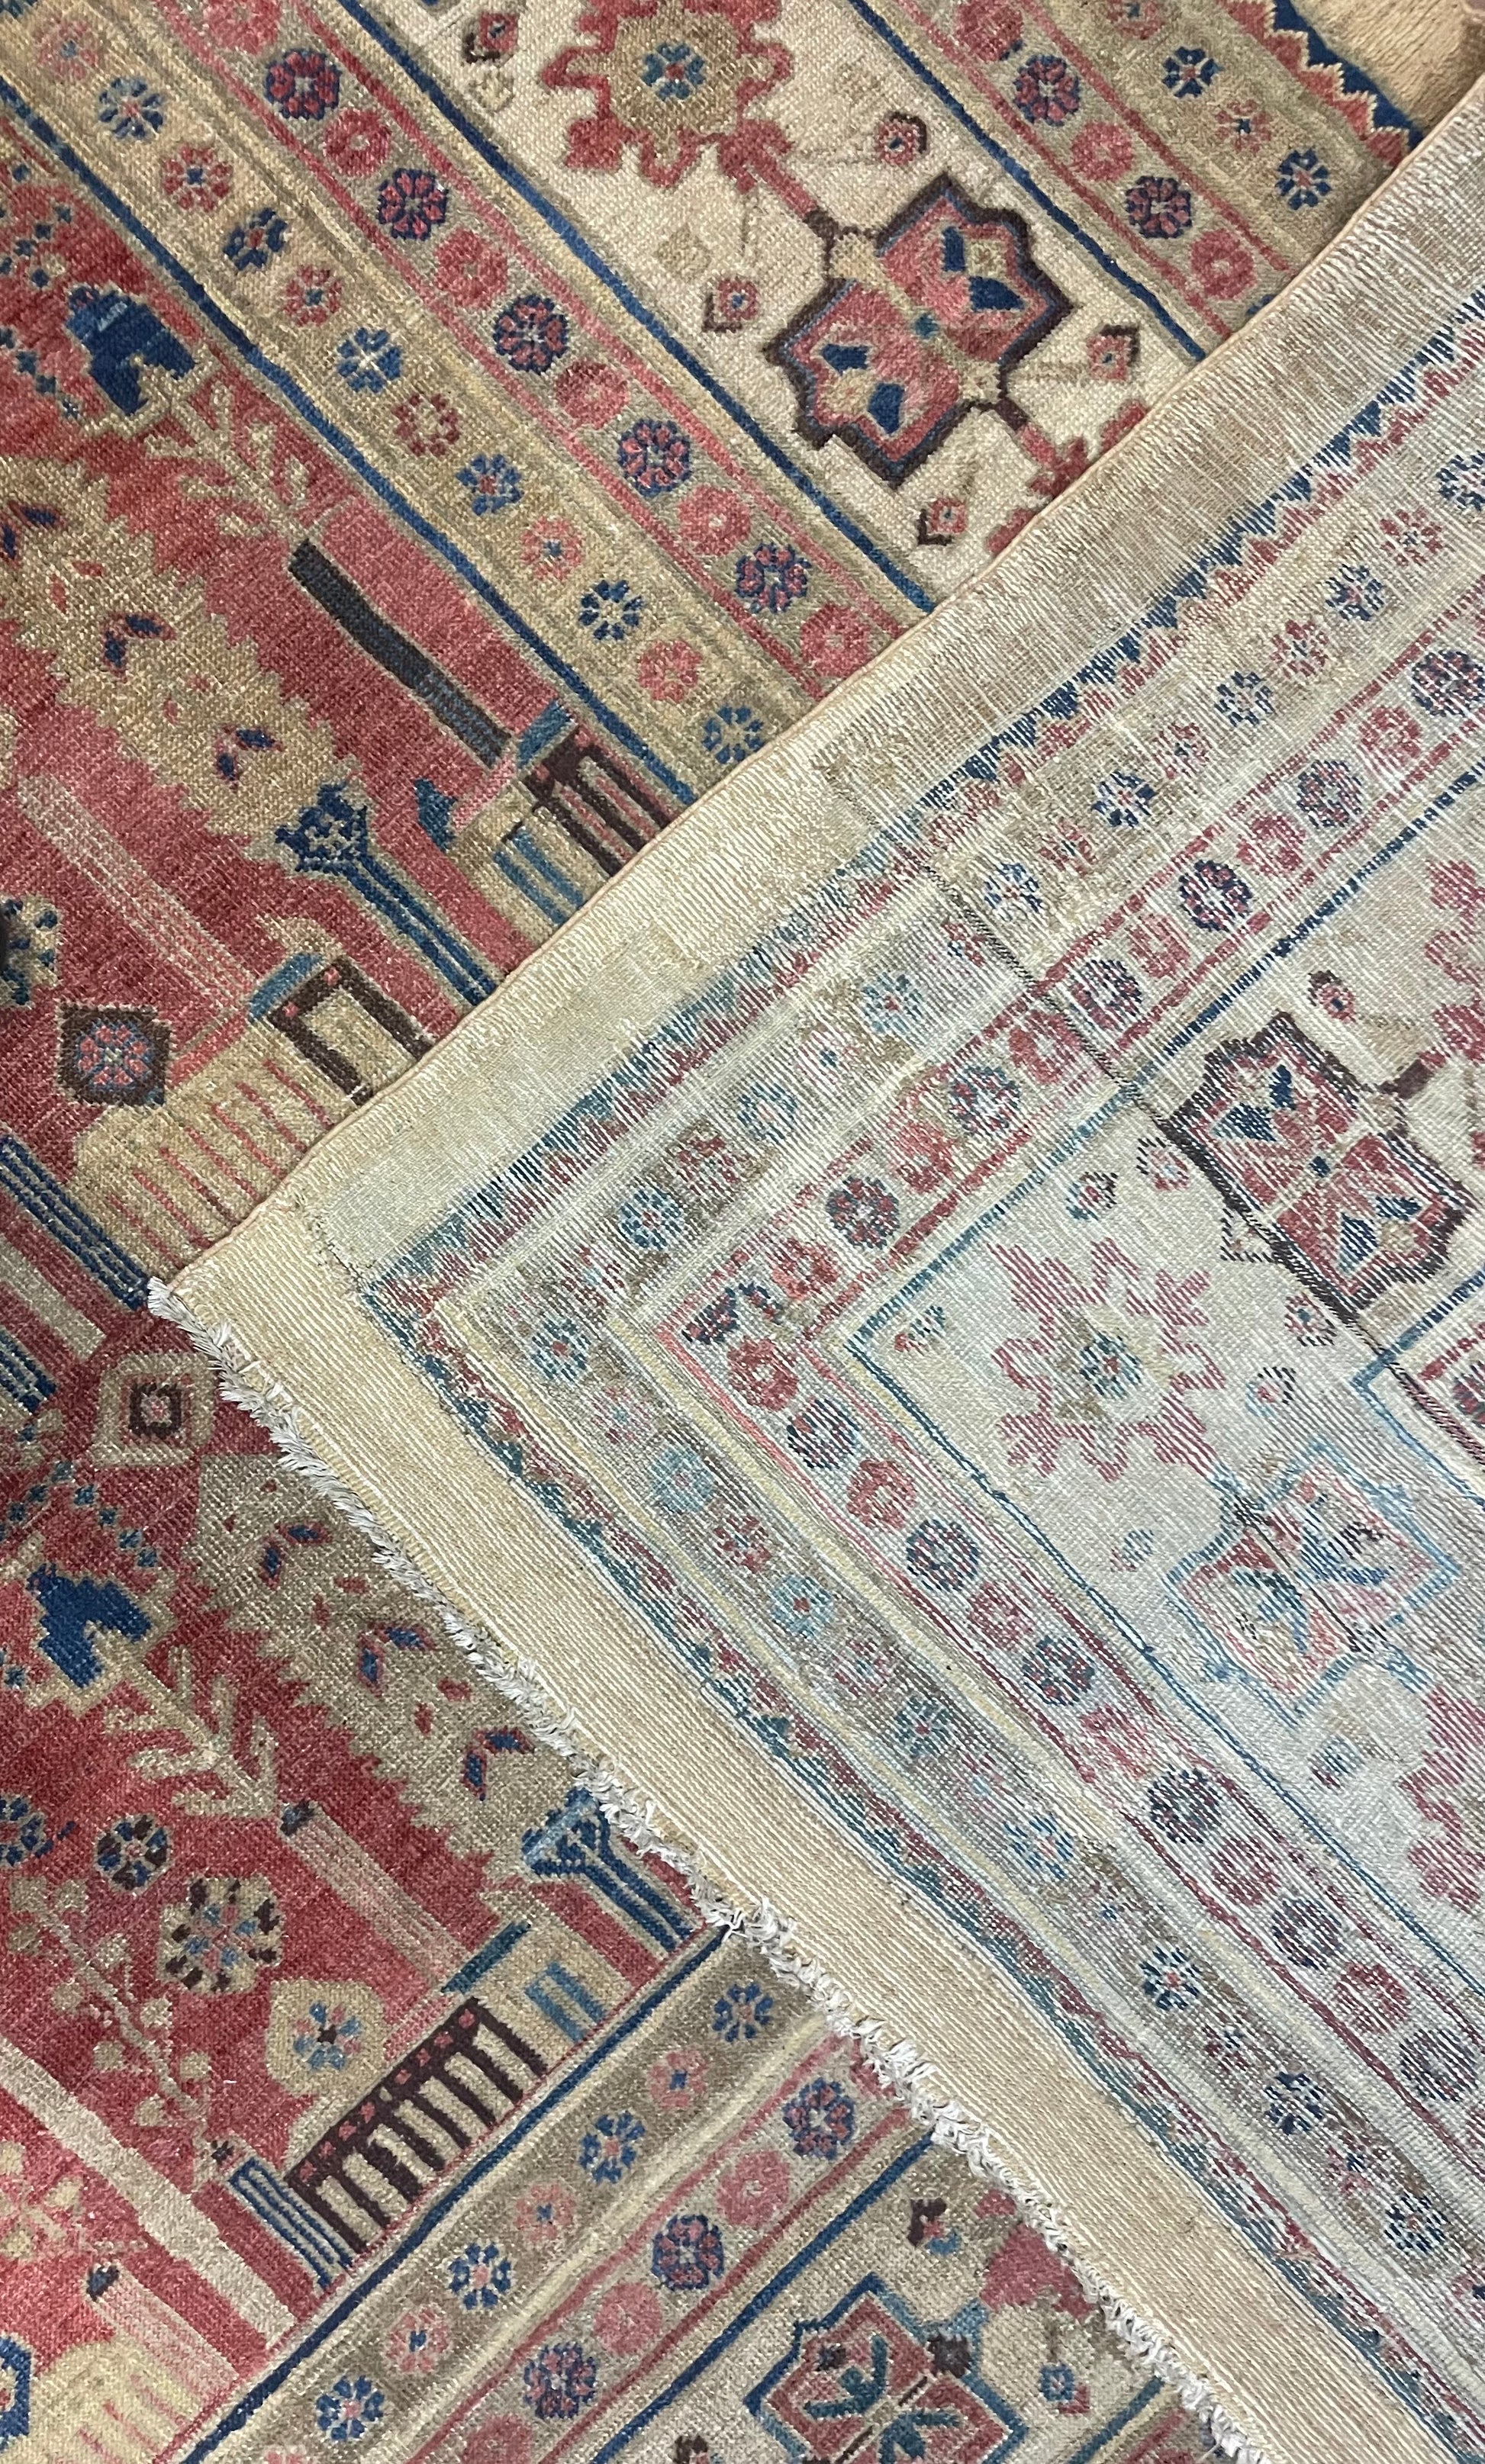 Back view of the palace-sized rug showcasing craftsmanship and size